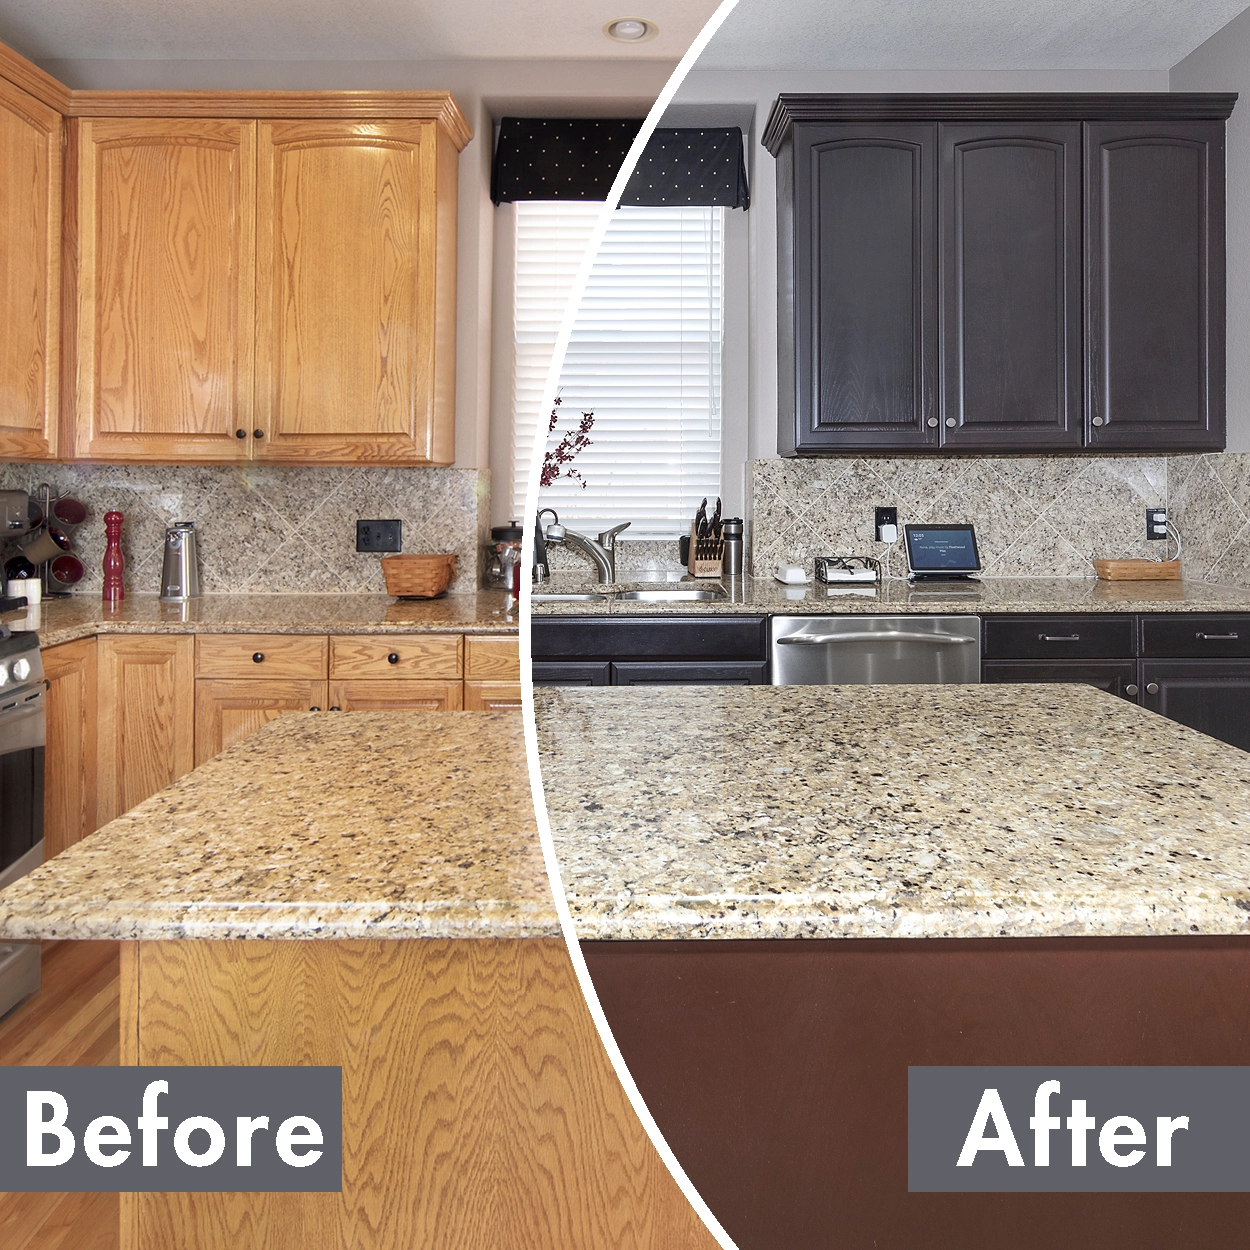 Cabinet Color Change N Hance, How To Change The Color Of Stain On Your Kitchen Cabinets